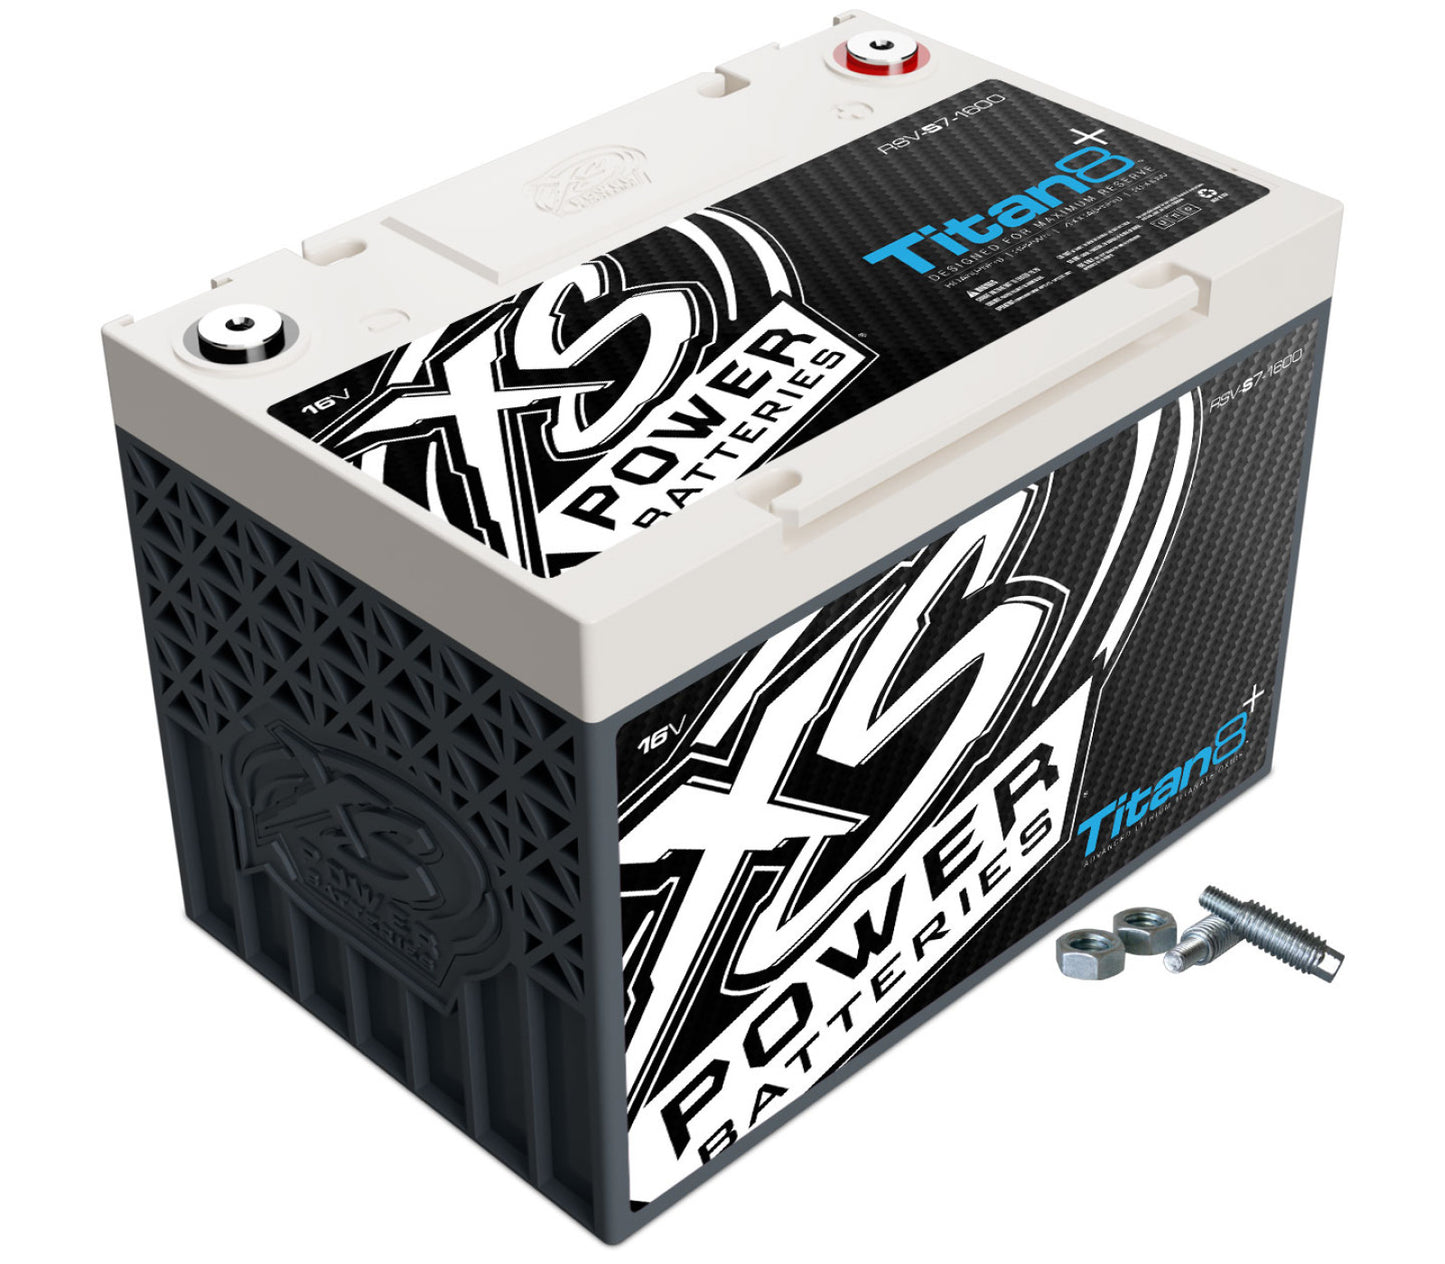 XS Power Batteries 12V, 14V, 16V Lithium Titan 8 Batteries - M6 Terminal Bolts Included with Built In 2/0 Distribution 1000 Max Amps RSV-S7